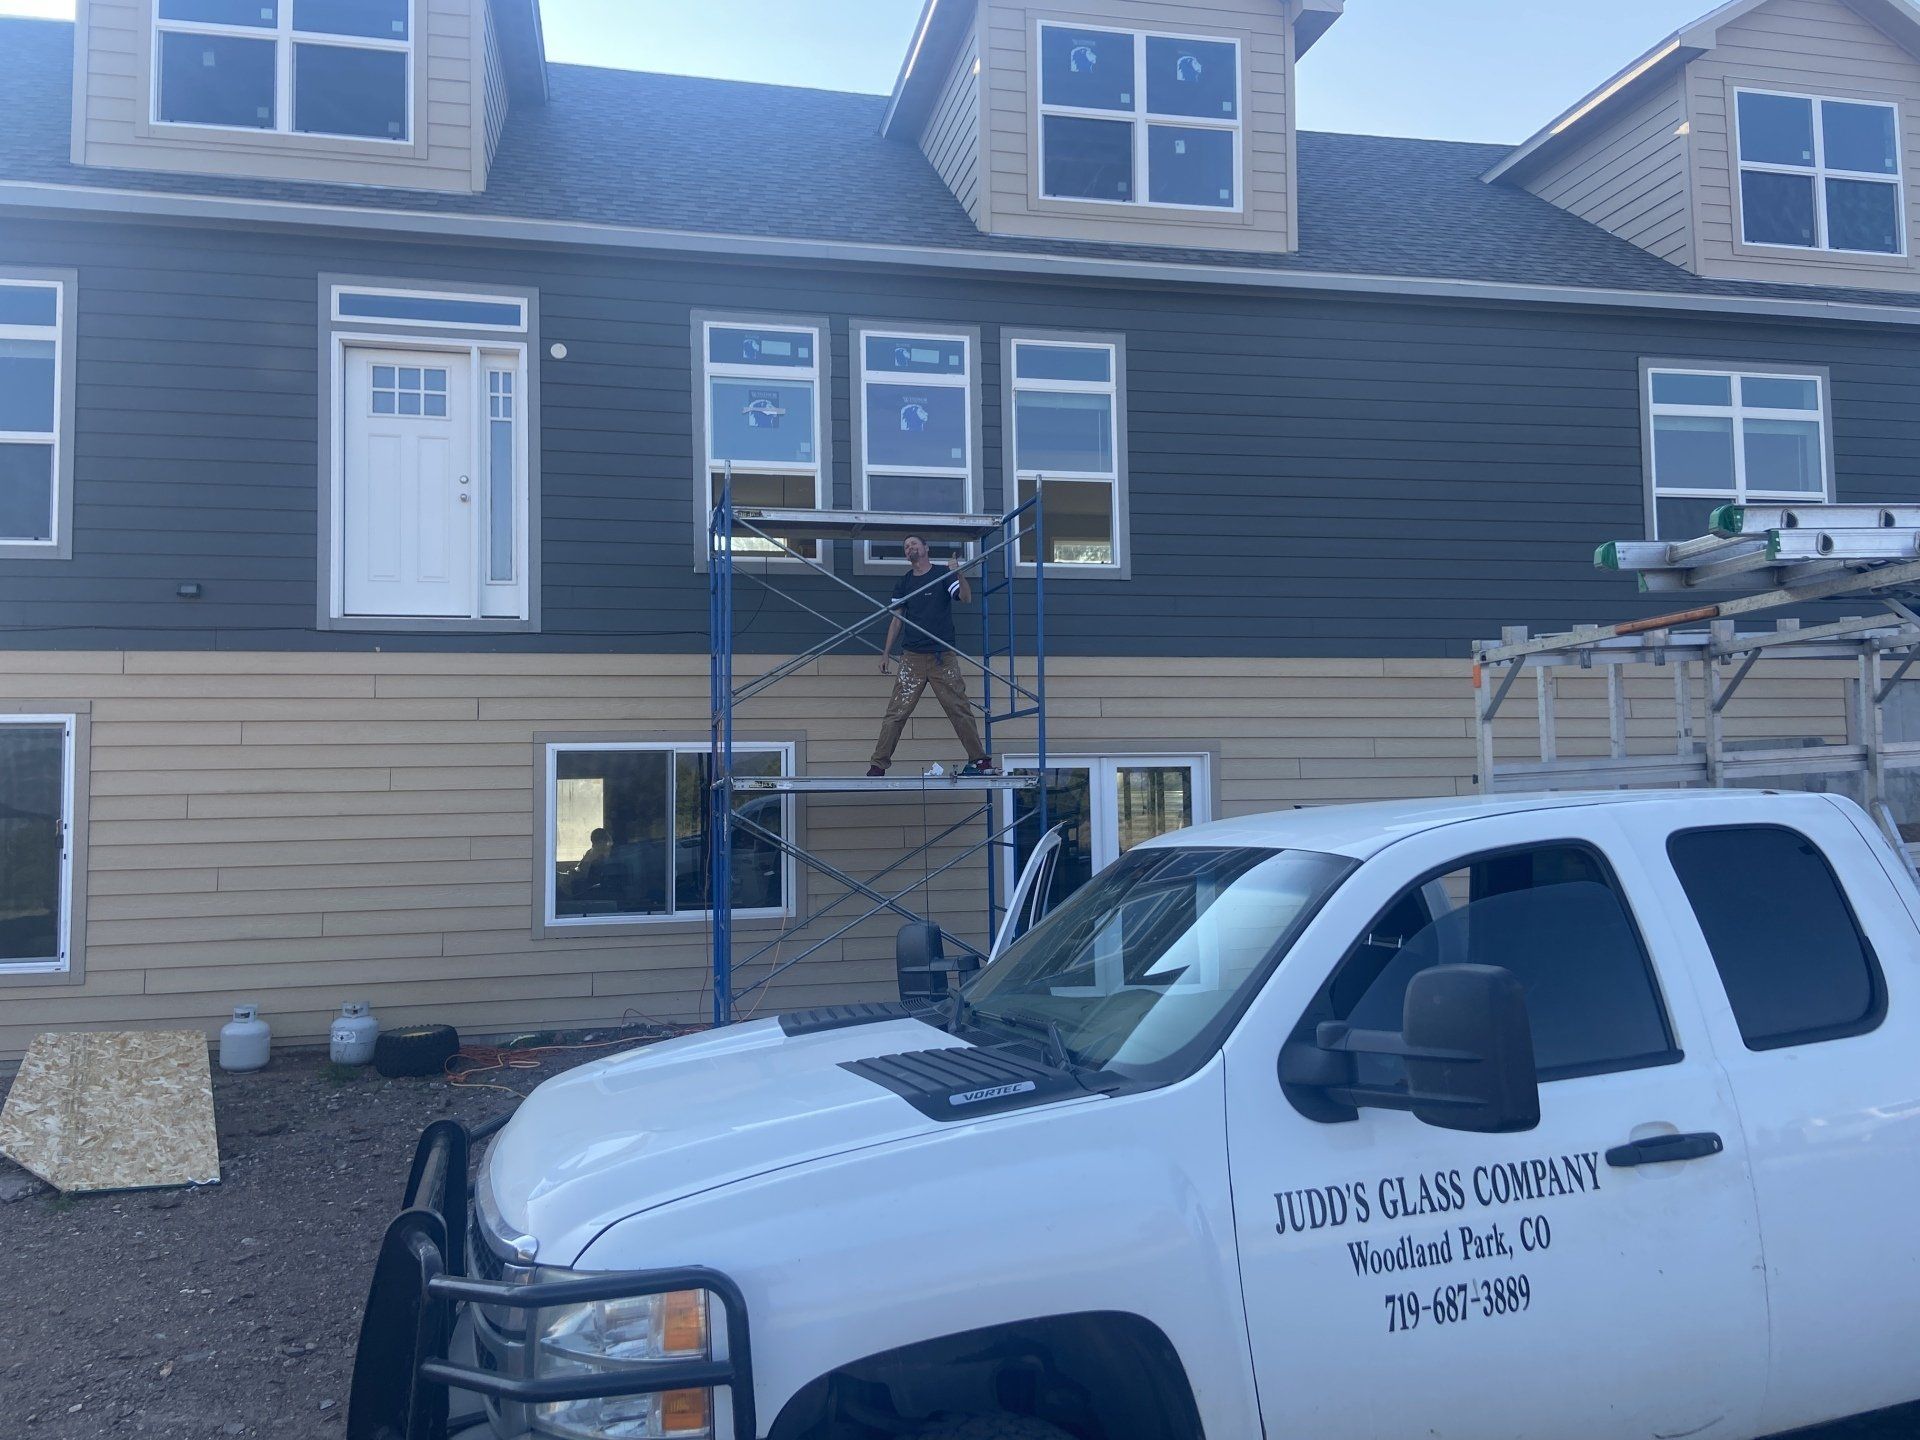 Apartment Windows Replacement in Woodland Park, CO